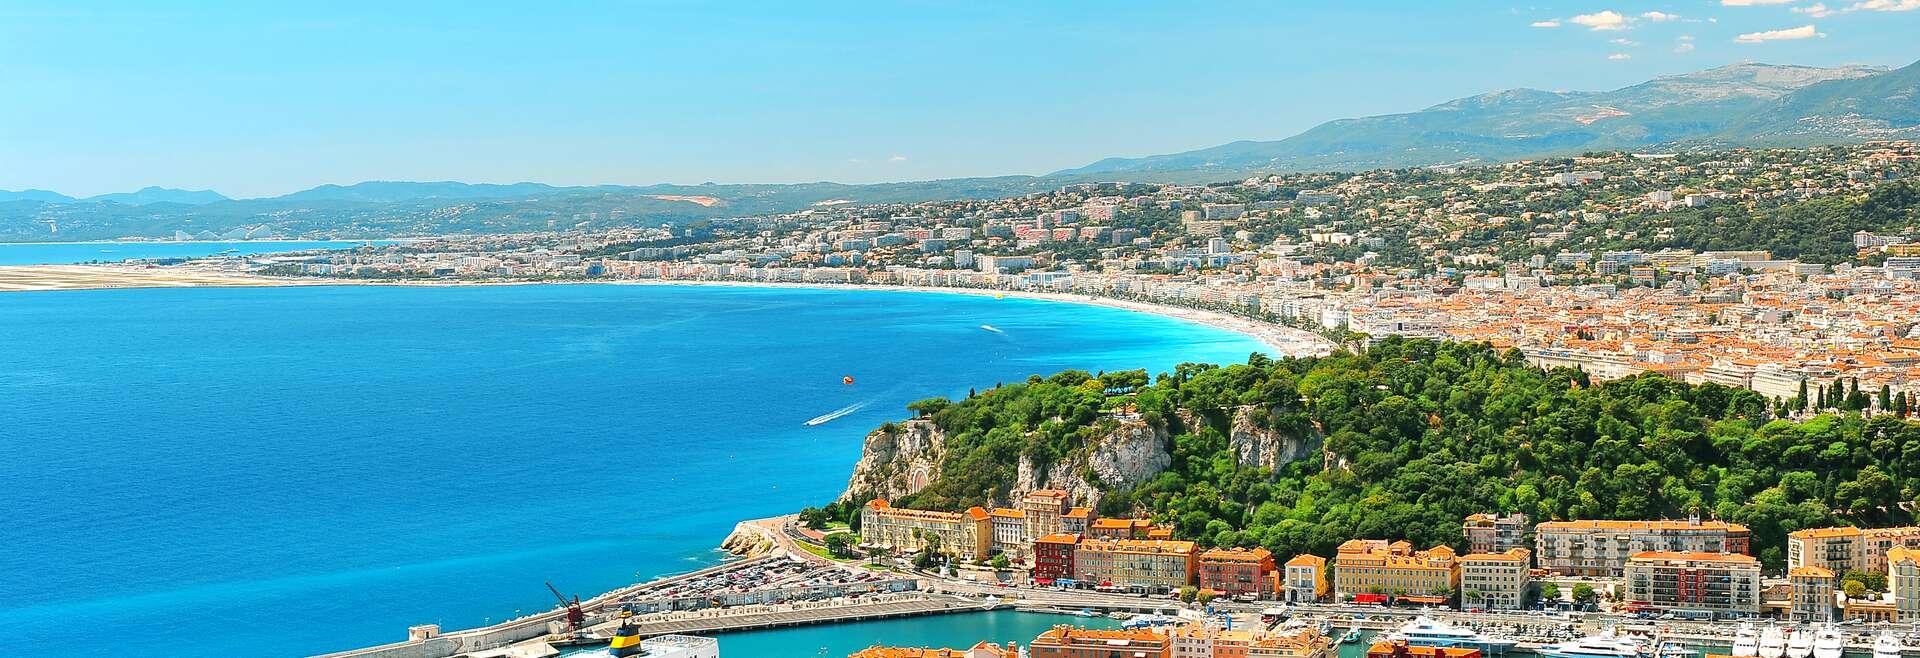 Panoramic view of Nice, Mediterranean Sea, France, French riviera